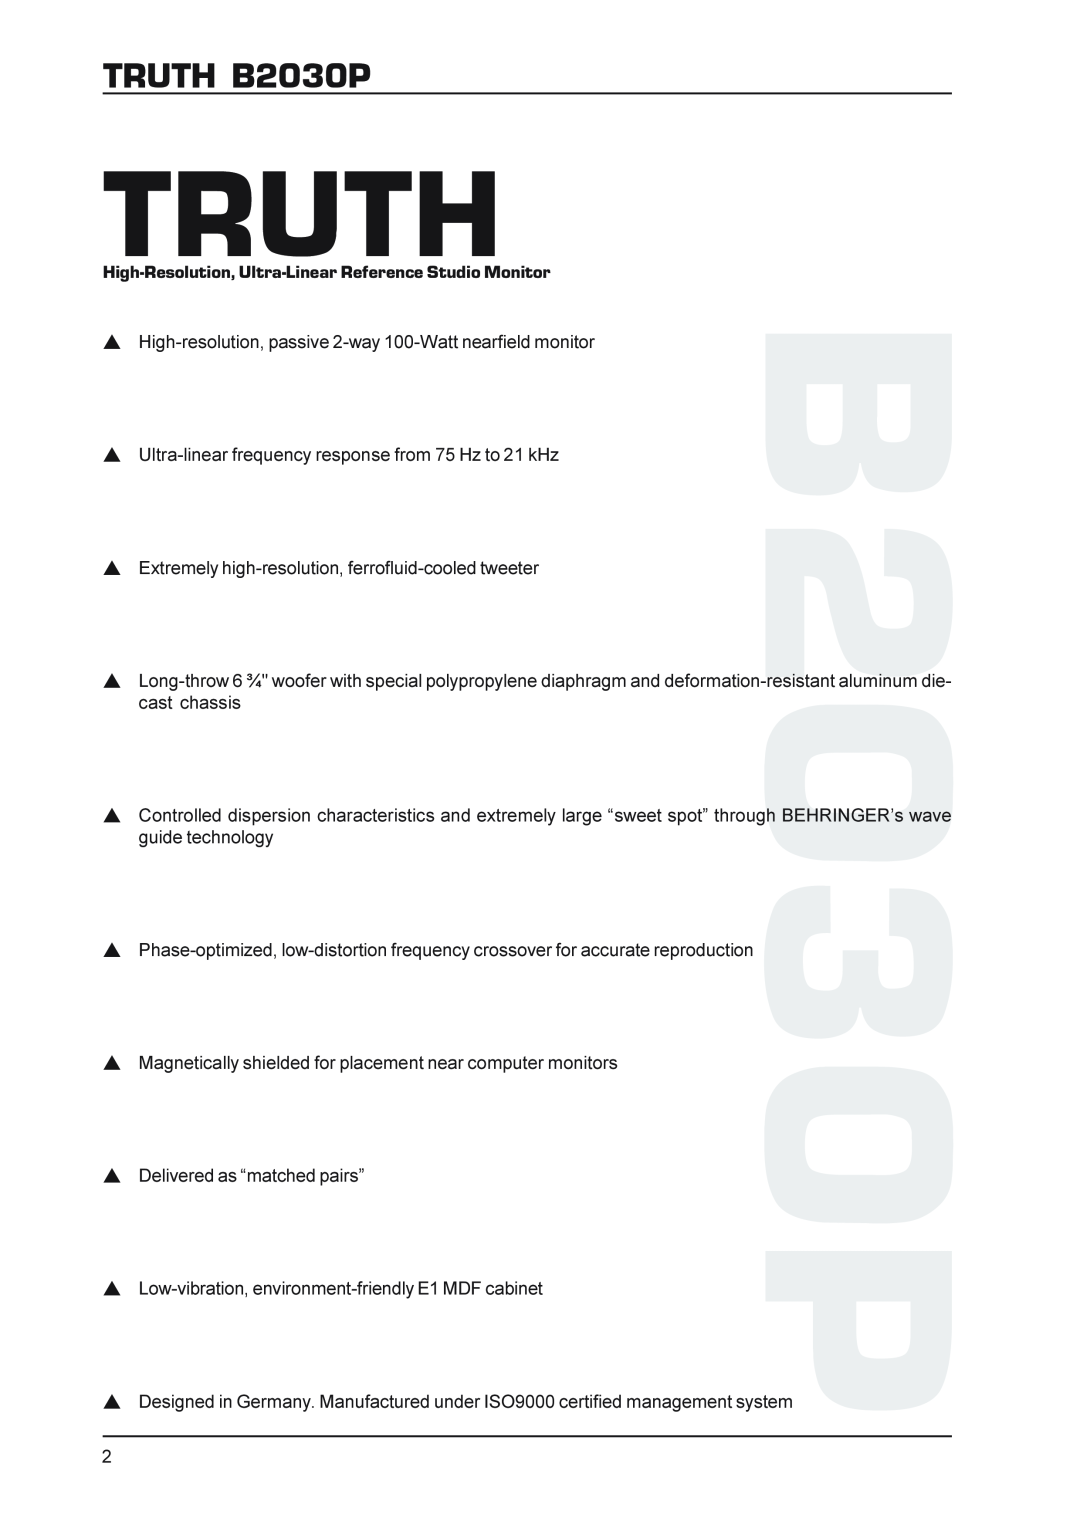 Behringer technical specifications TRUTH B2030P, Truth 